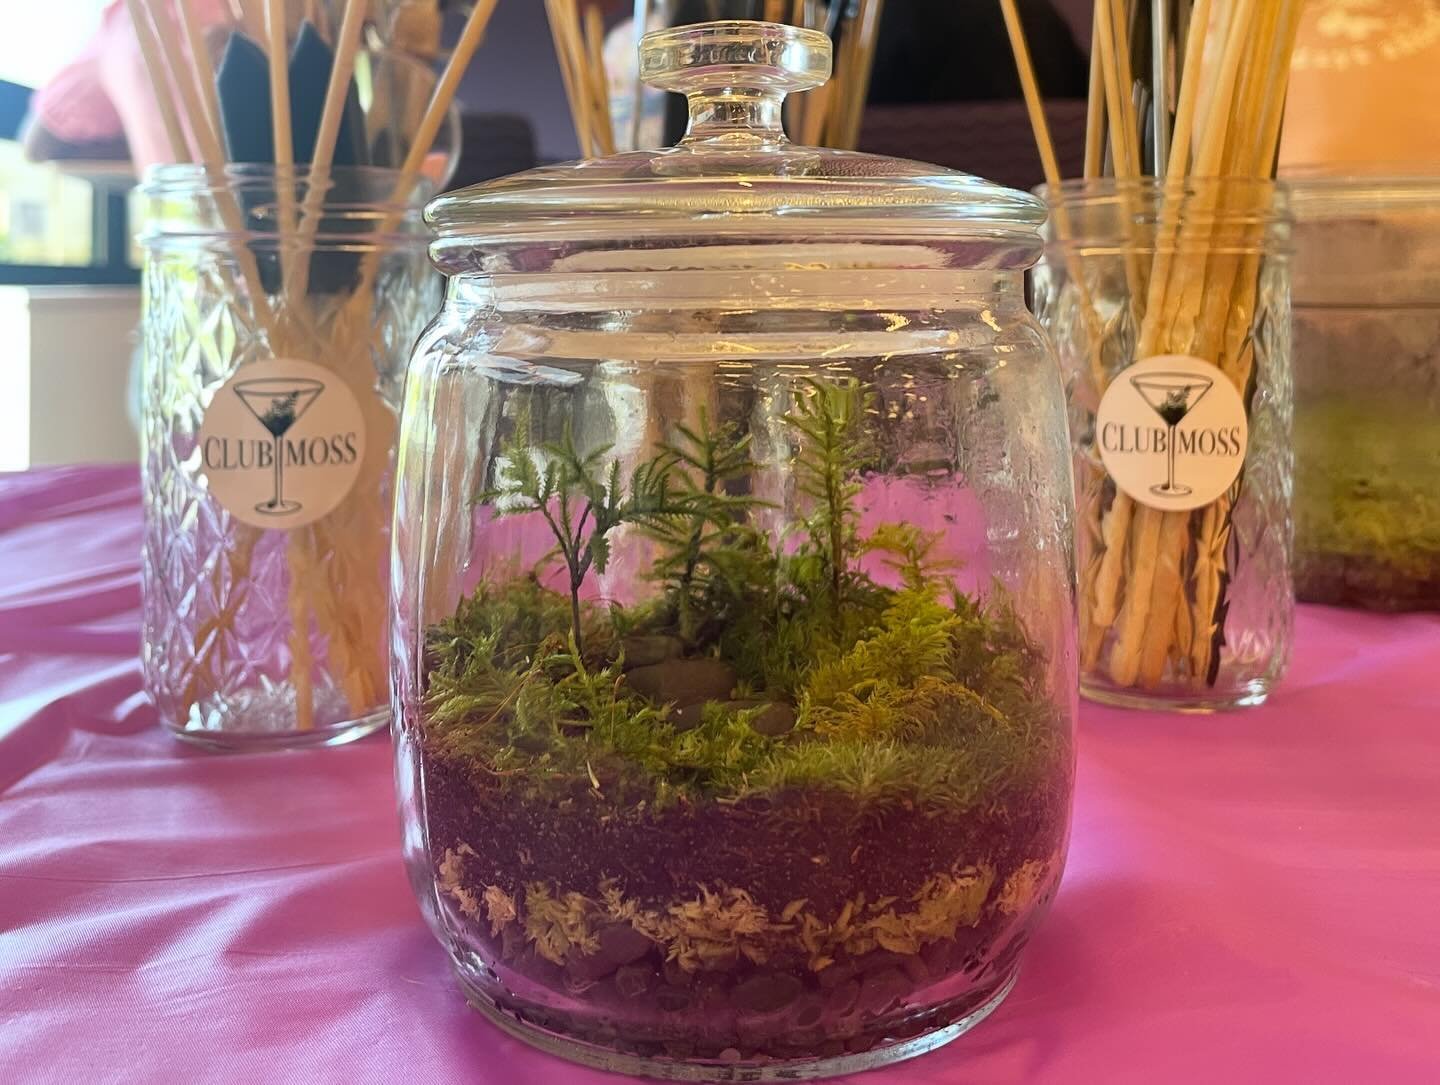 BIG thank you to @berje_inc for having us for this very special Earth Day terrarium workshop! 

Berj&eacute; has been ethically &amp; sustainably sourcing plants and natural raw materials for use in the flavor and essential oil industry for over 70 y